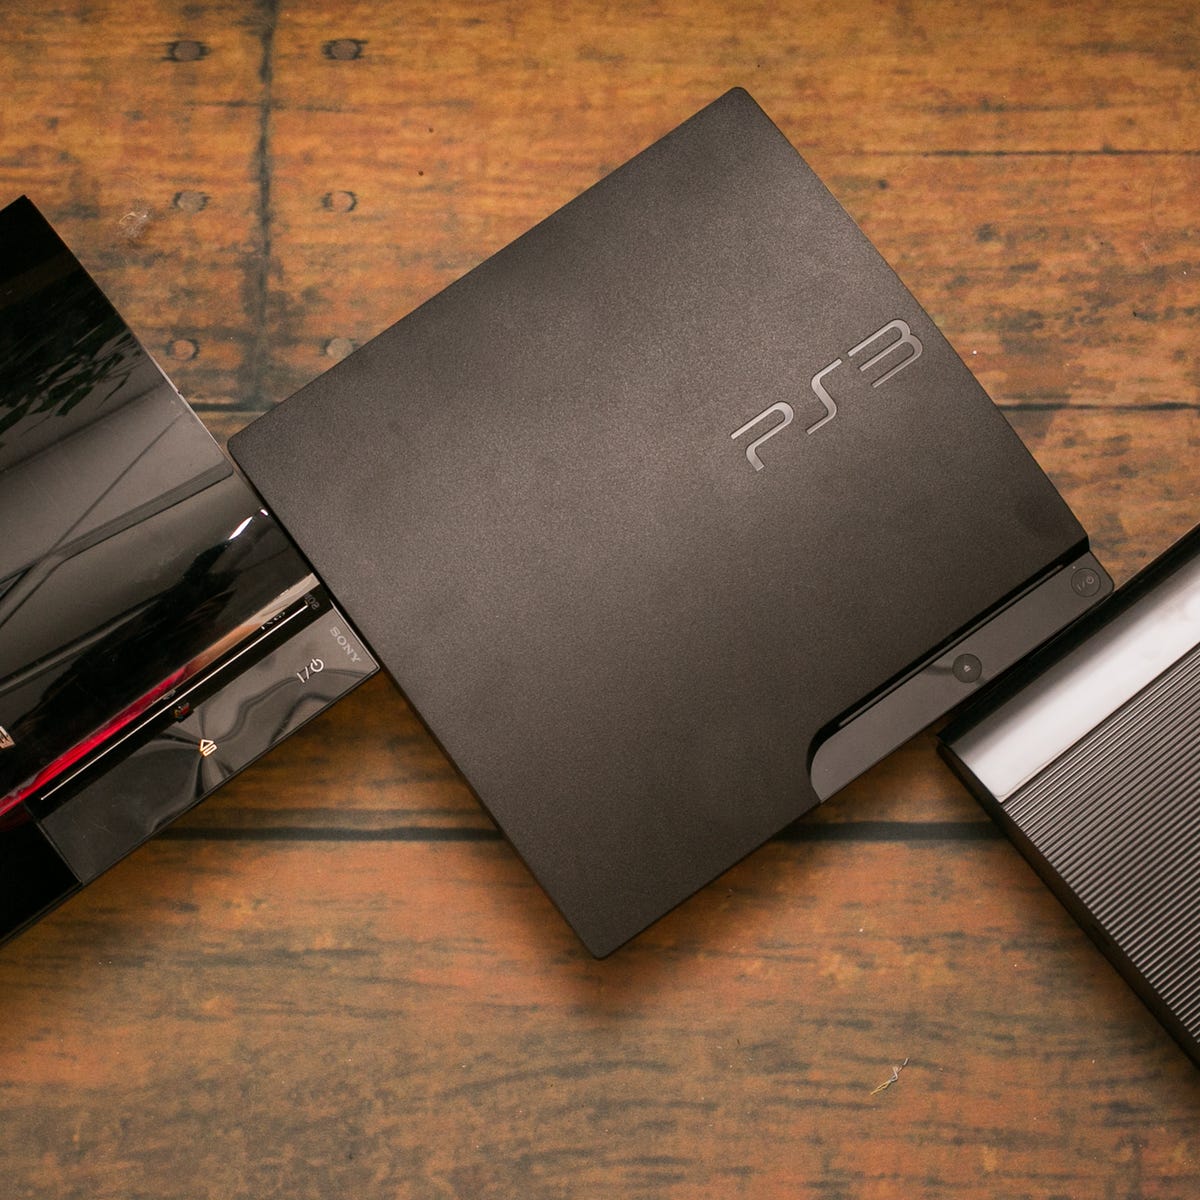 Sony 3 Slim review: Sony shrinks down new PS3 -- except for the price - CNET